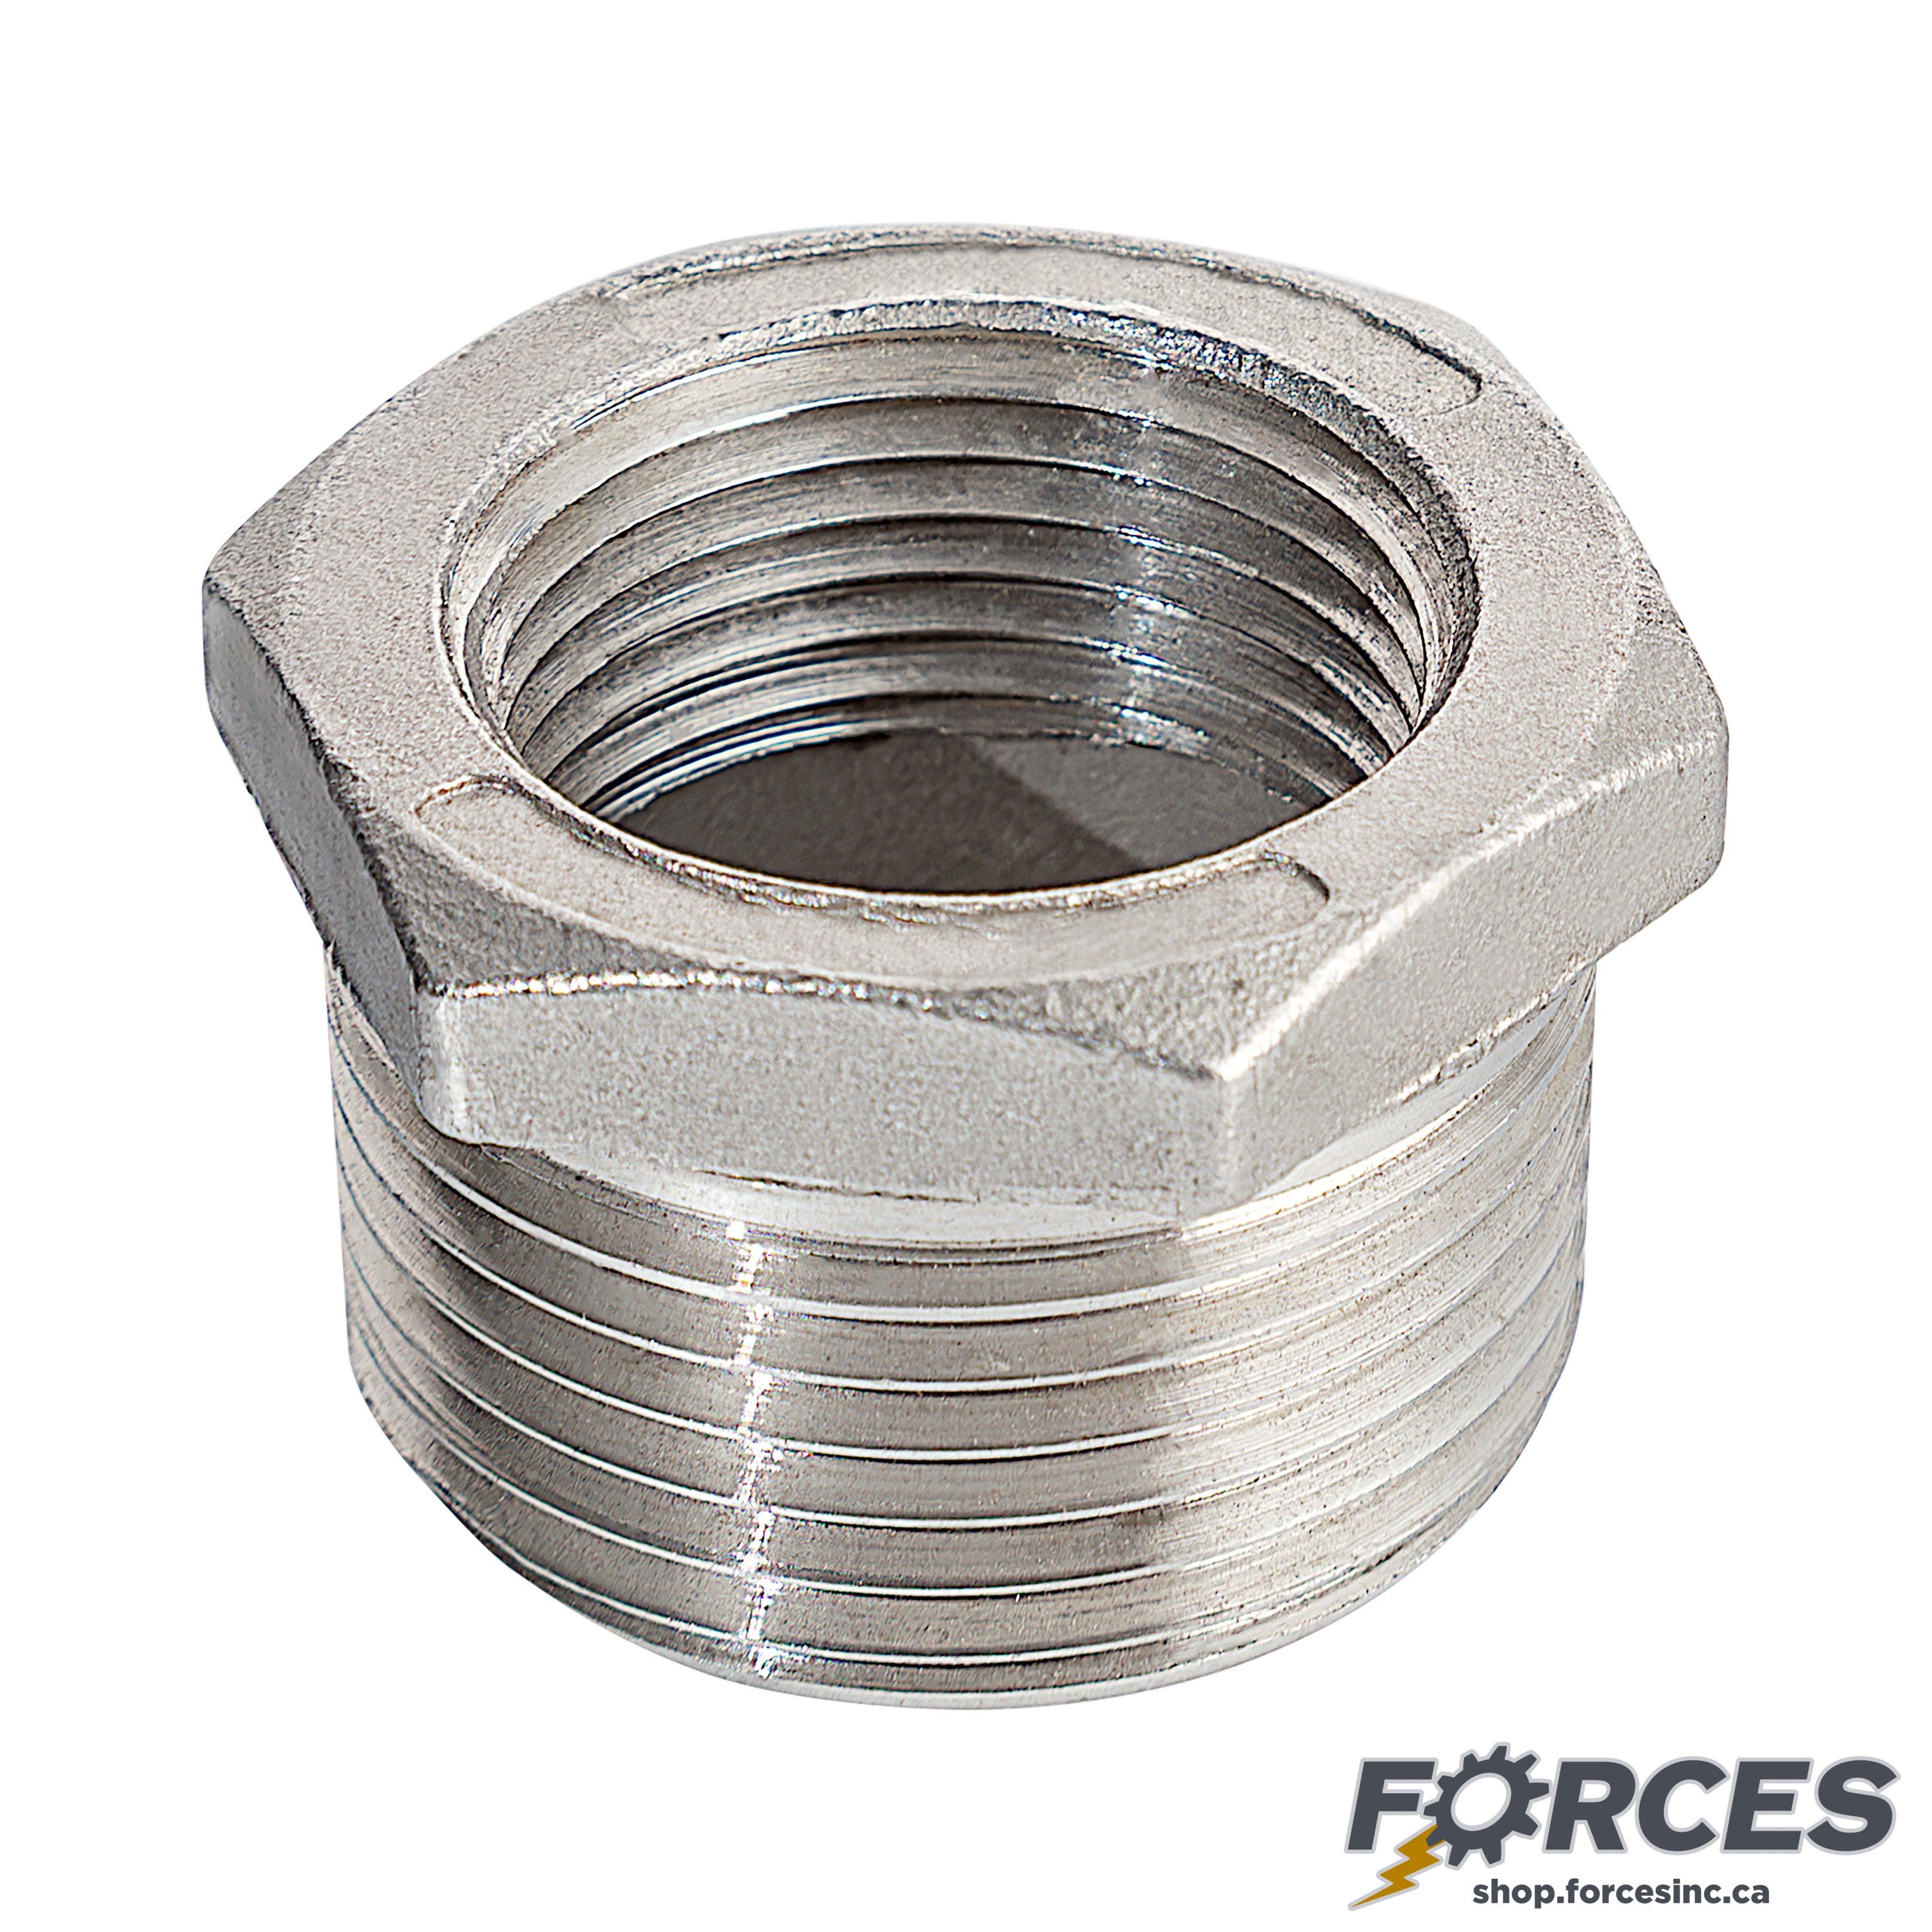 3/4" (M) x 3/8" (F) Reducing Hex Bushing NPT #150 - Stainless Steel 316 - Forces Inc